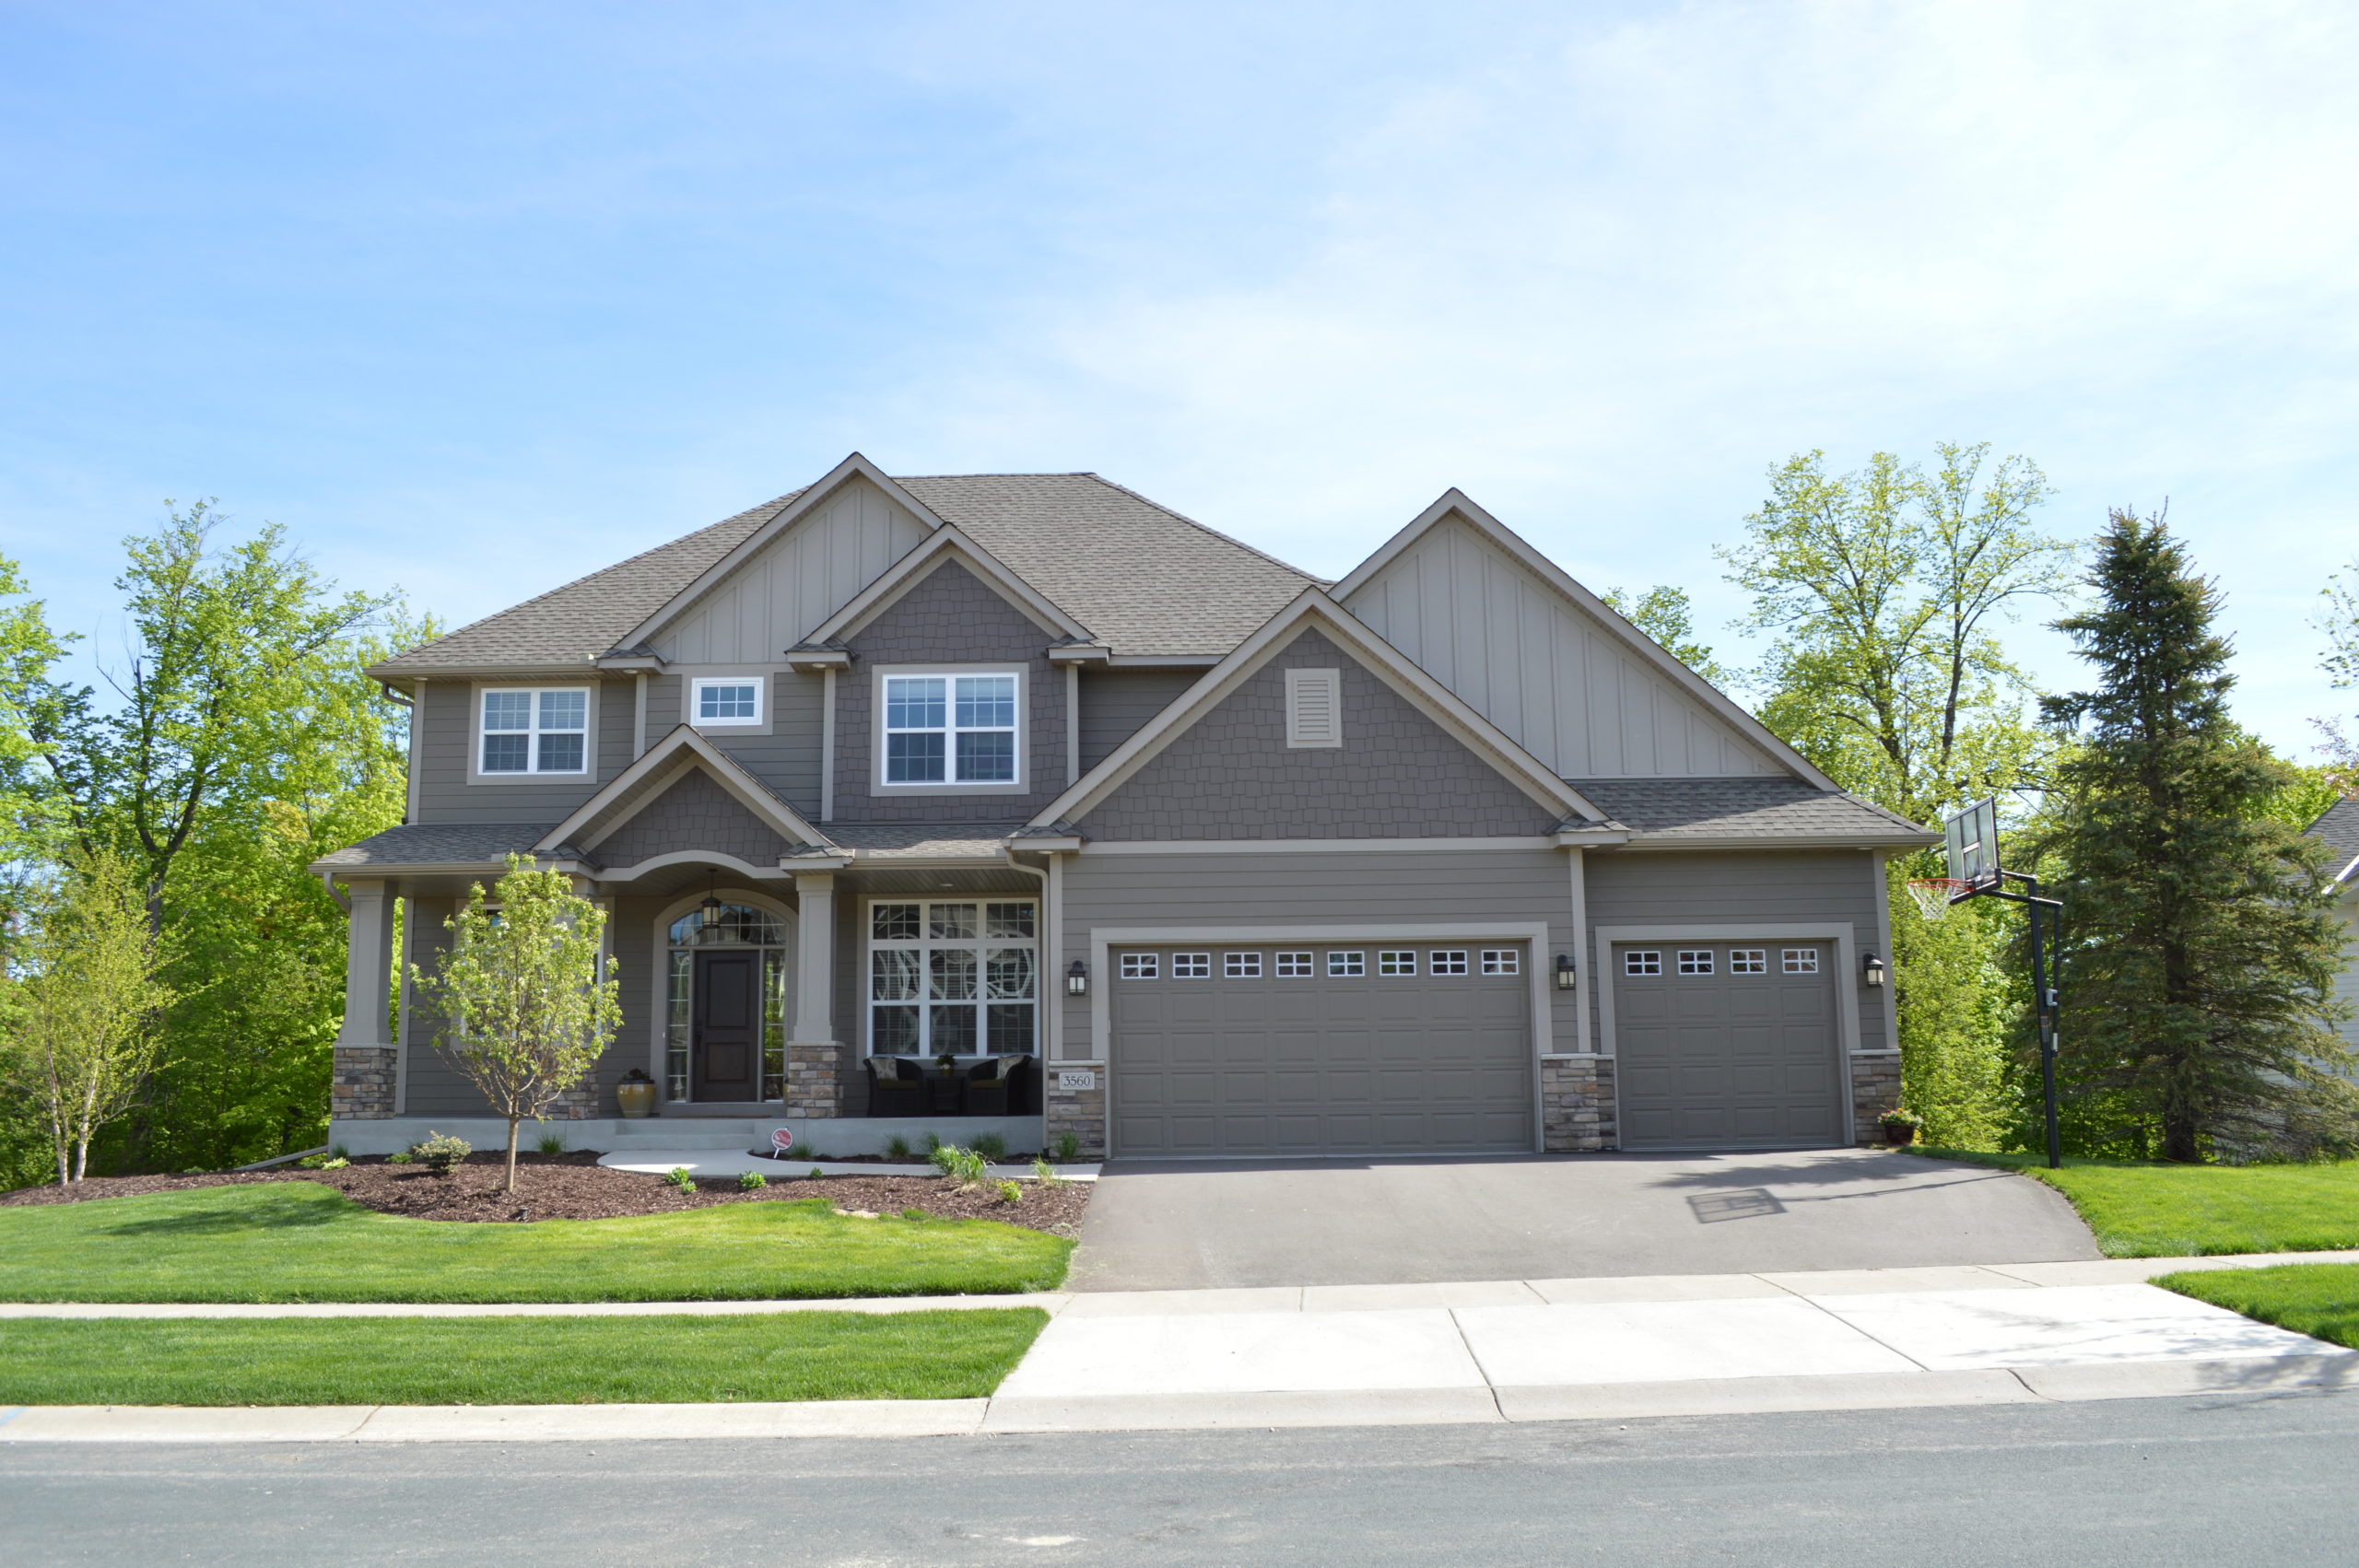 Get a free roofing inspection in Minnesota for a house with two garages and a driveway.